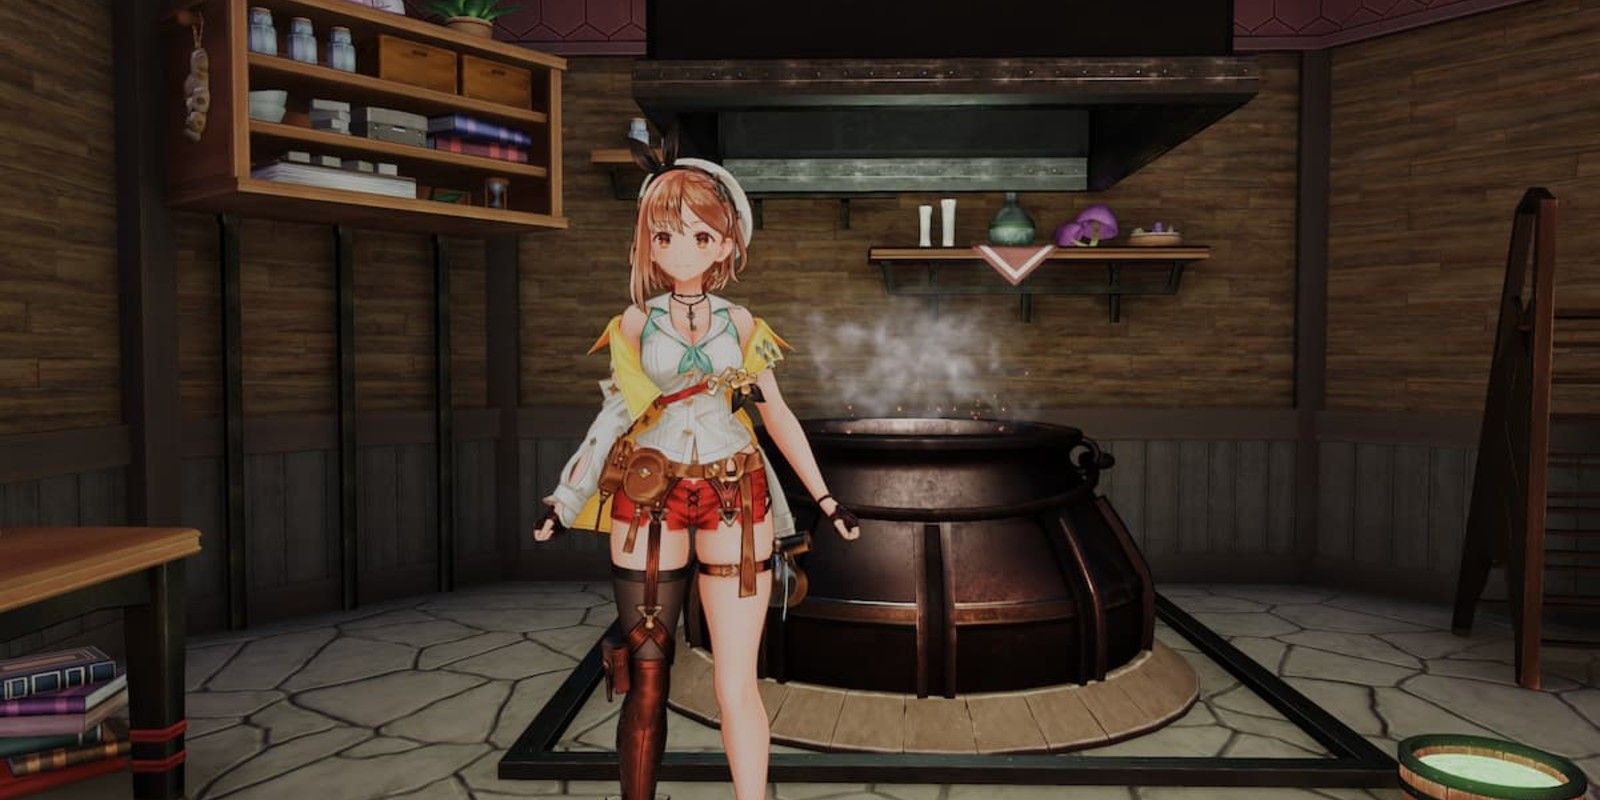 The Alchemy station at the Abelheim apartment in Atelier Ryza 2